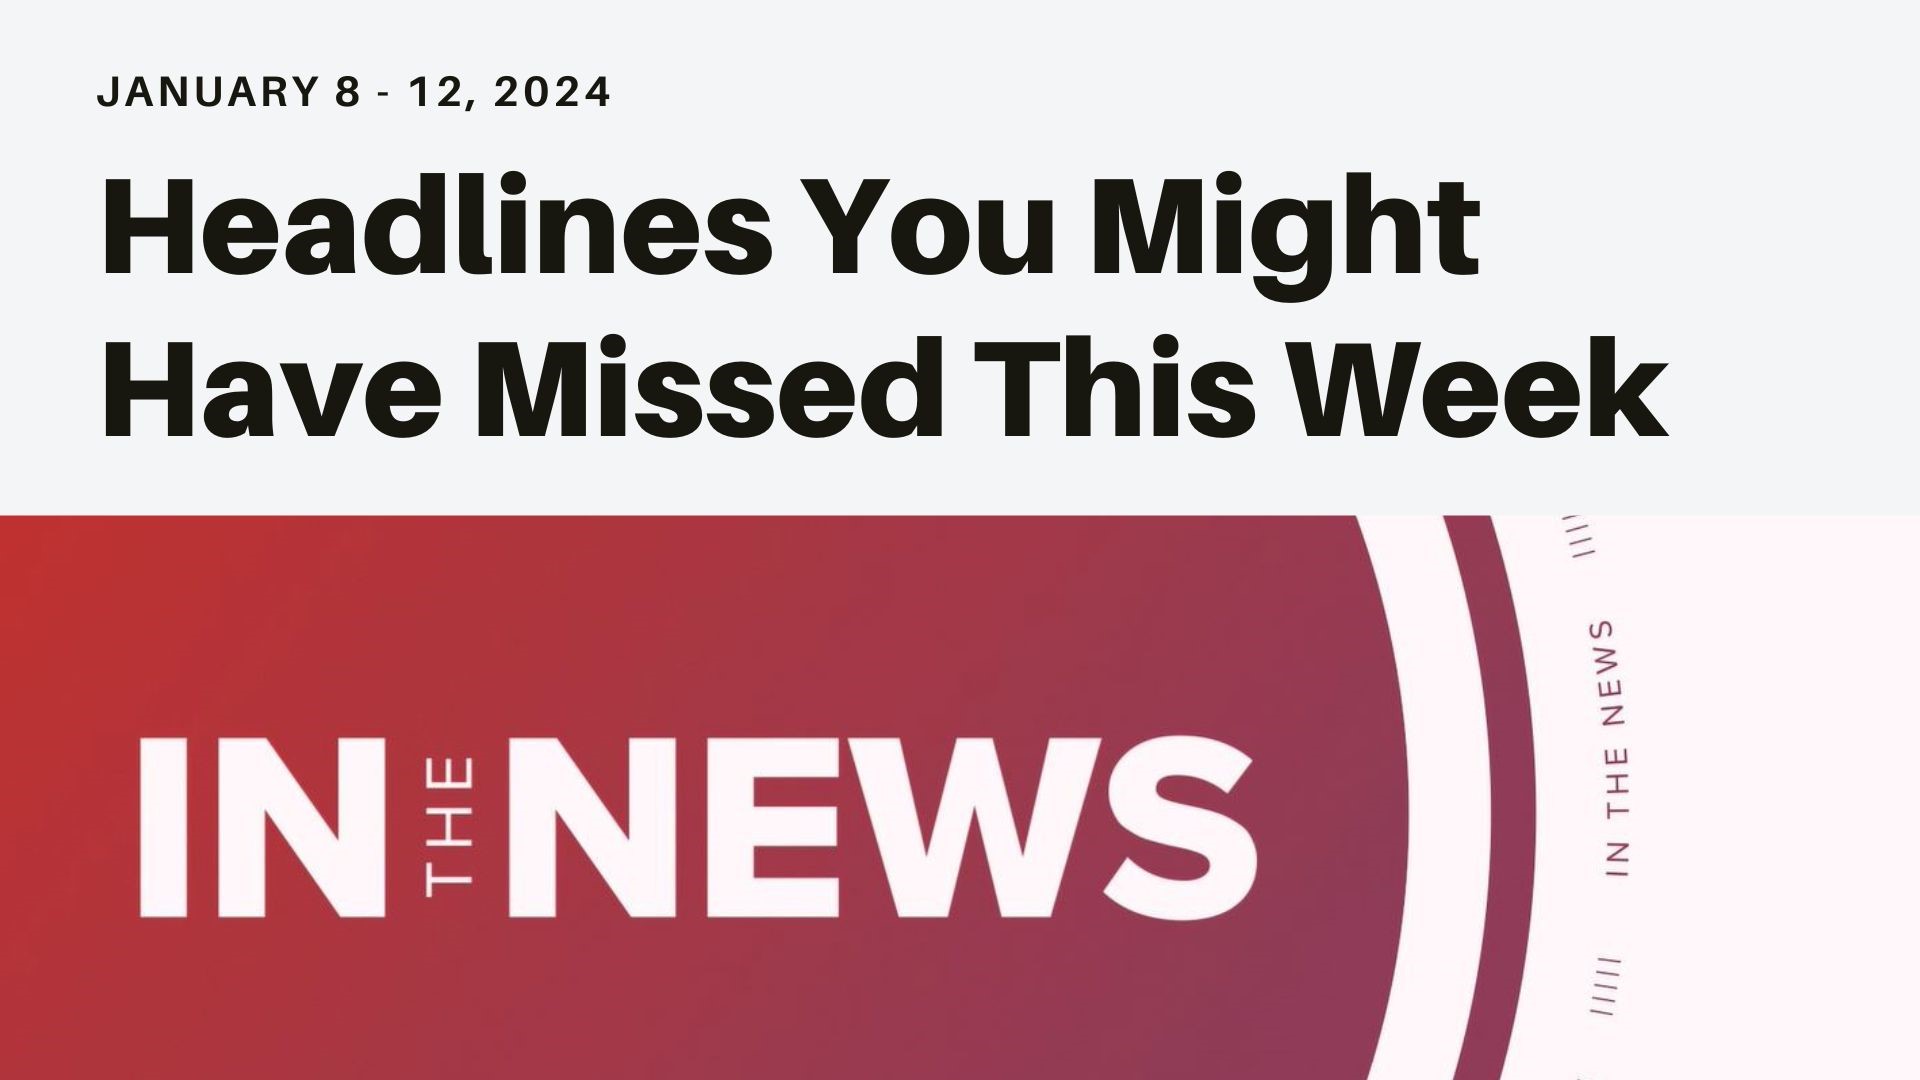 A look at some of the headlines you might have missed this week from the FAA investigating Boeing to Trump's civil fraud trial coming to an end and a COVID surge.